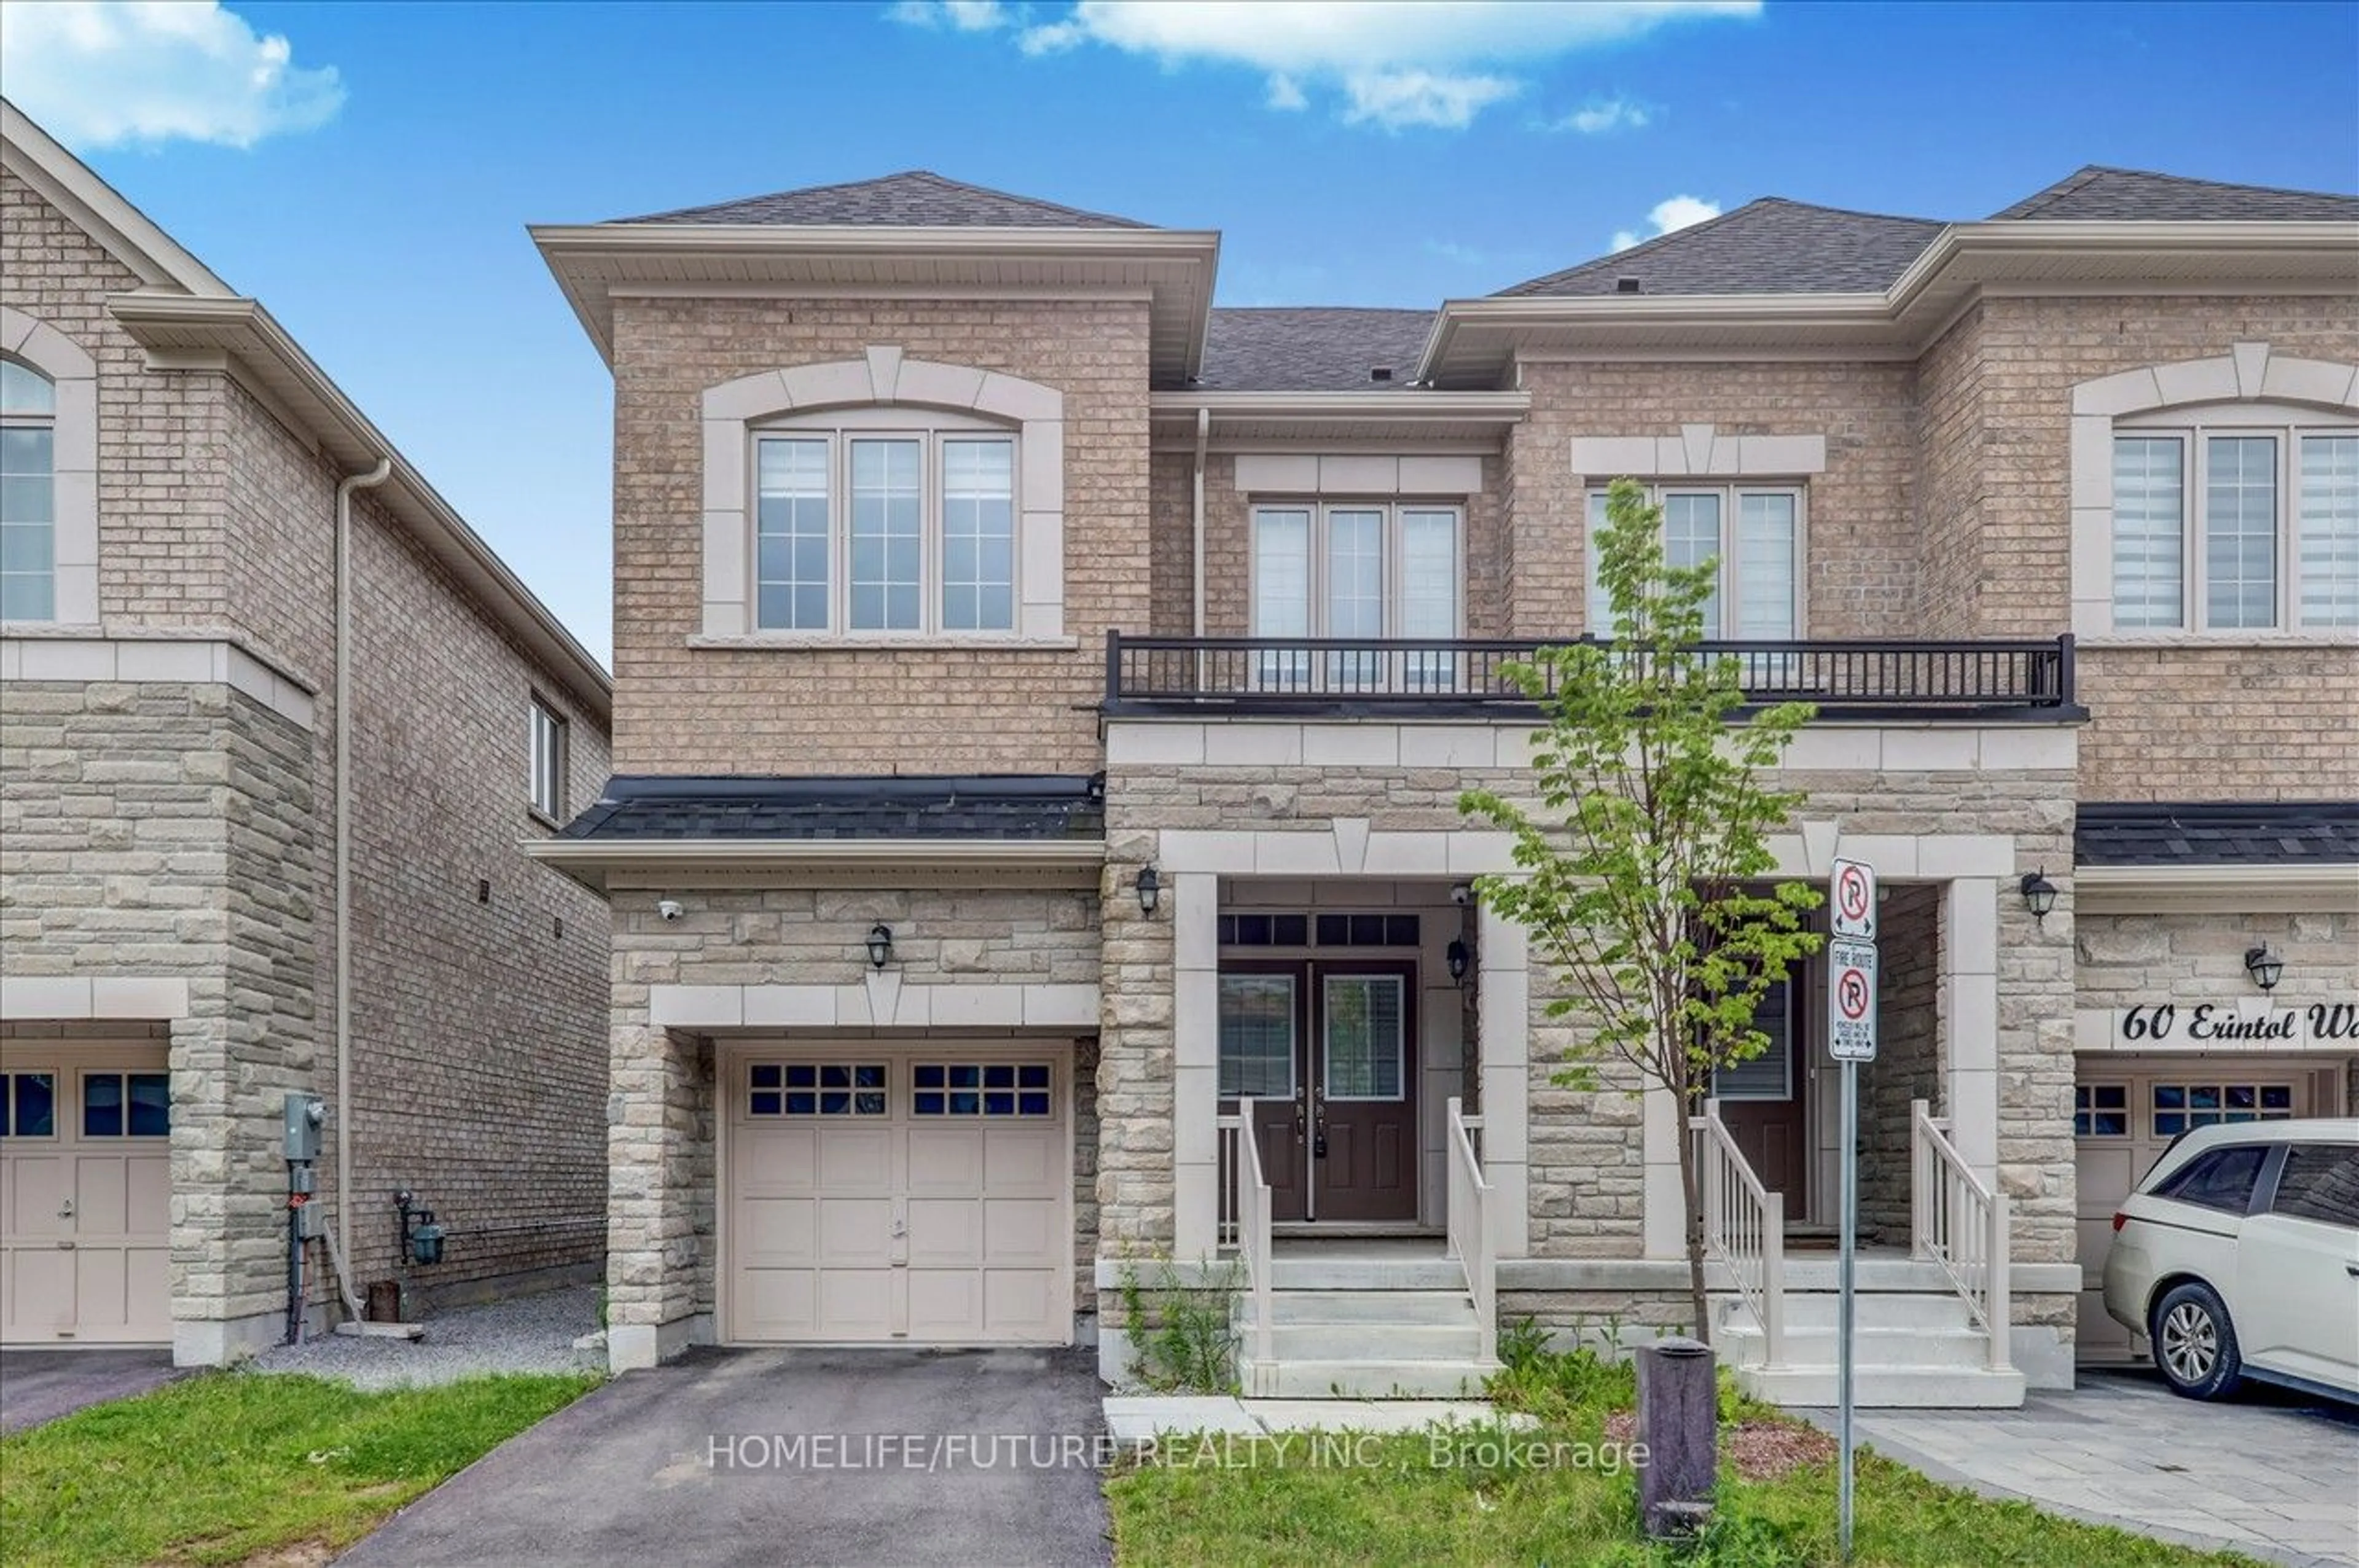 Home with brick exterior material for 58 Erintol Way, Markham Ontario L3S 0E6